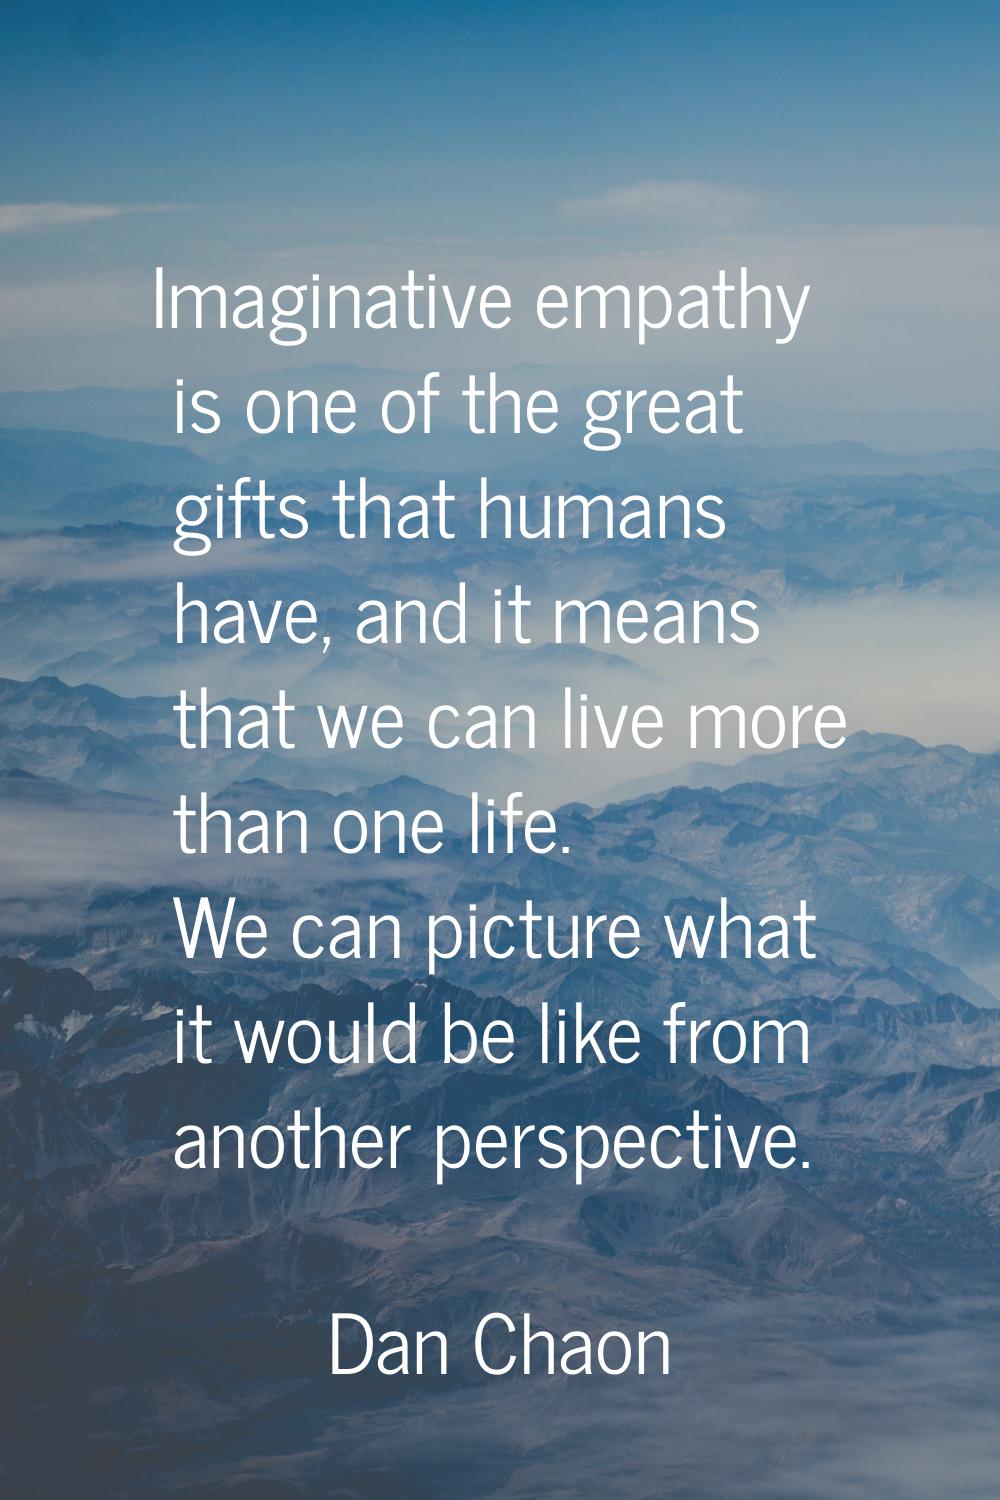 Imaginative empathy is one of the great gifts that humans have, and it means that we can live more 